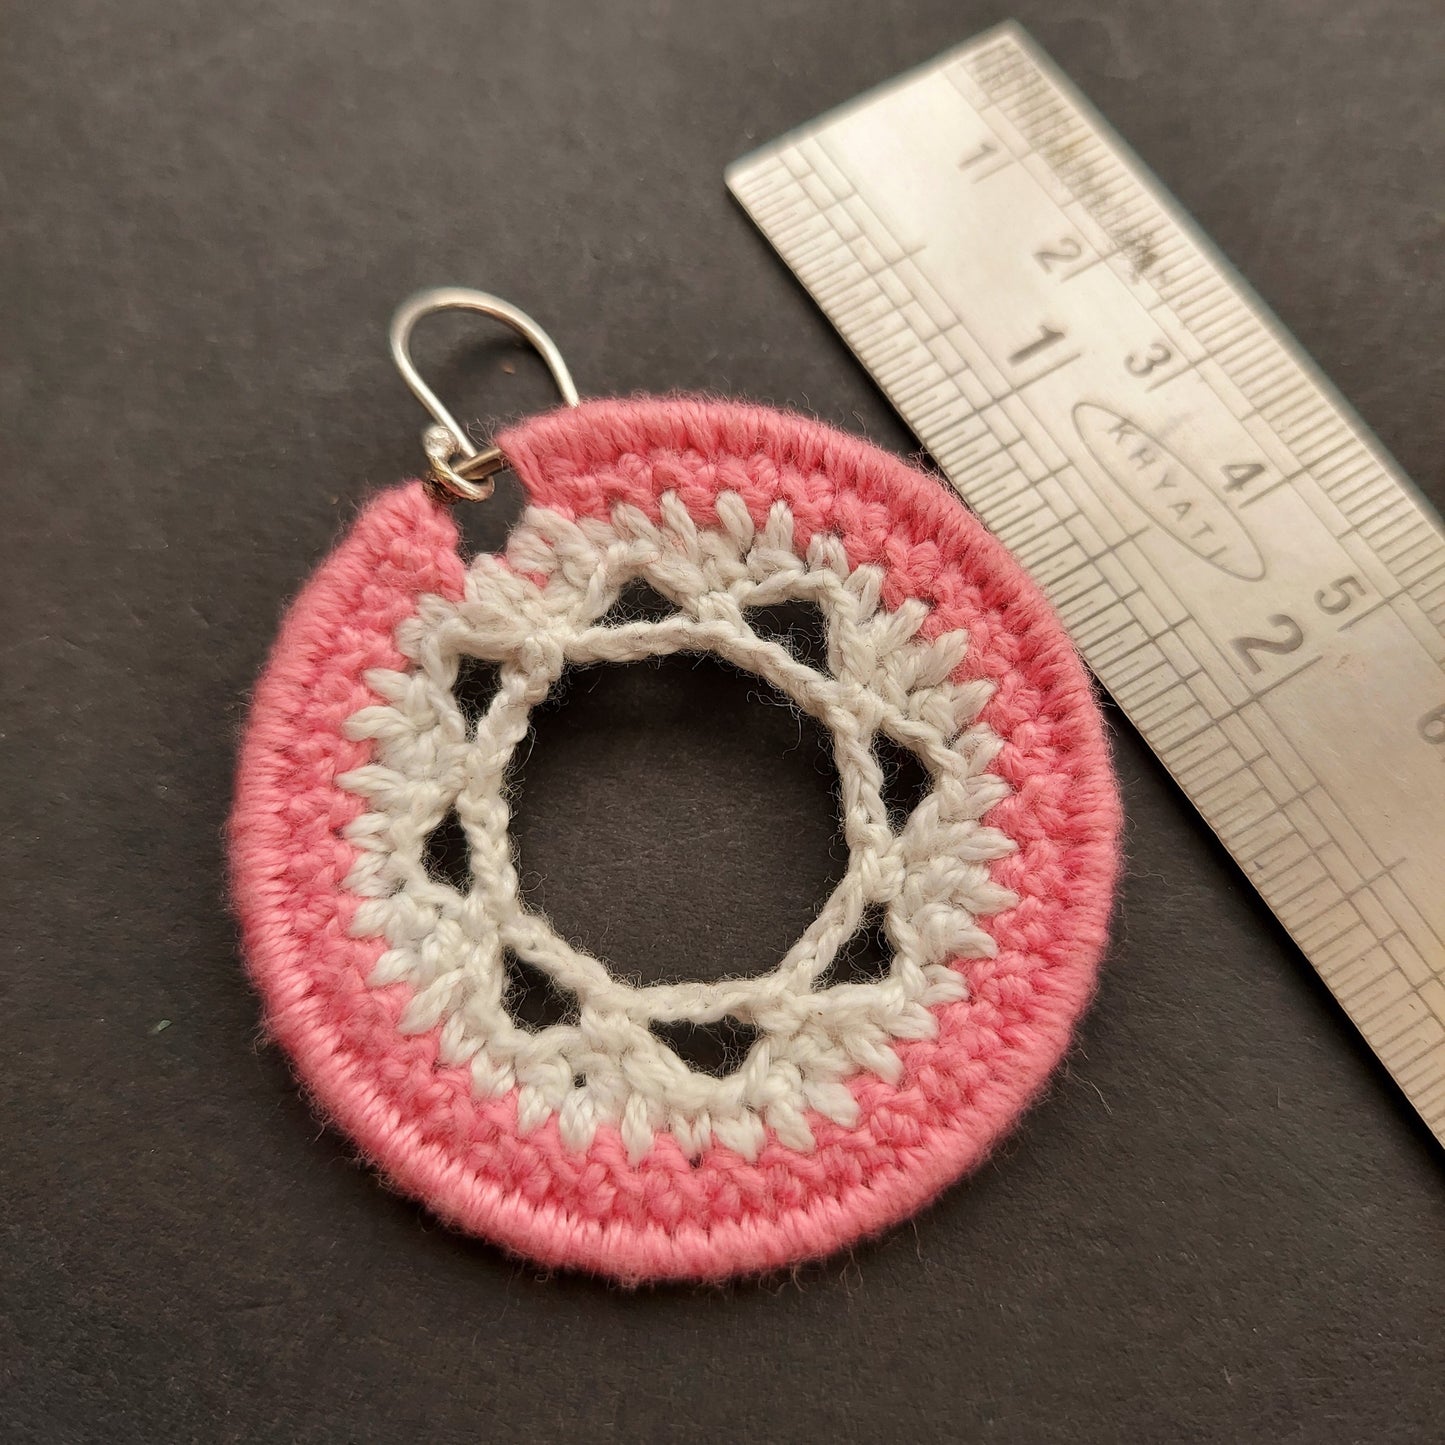 Handcrafted White and Pink Crochet Earrings